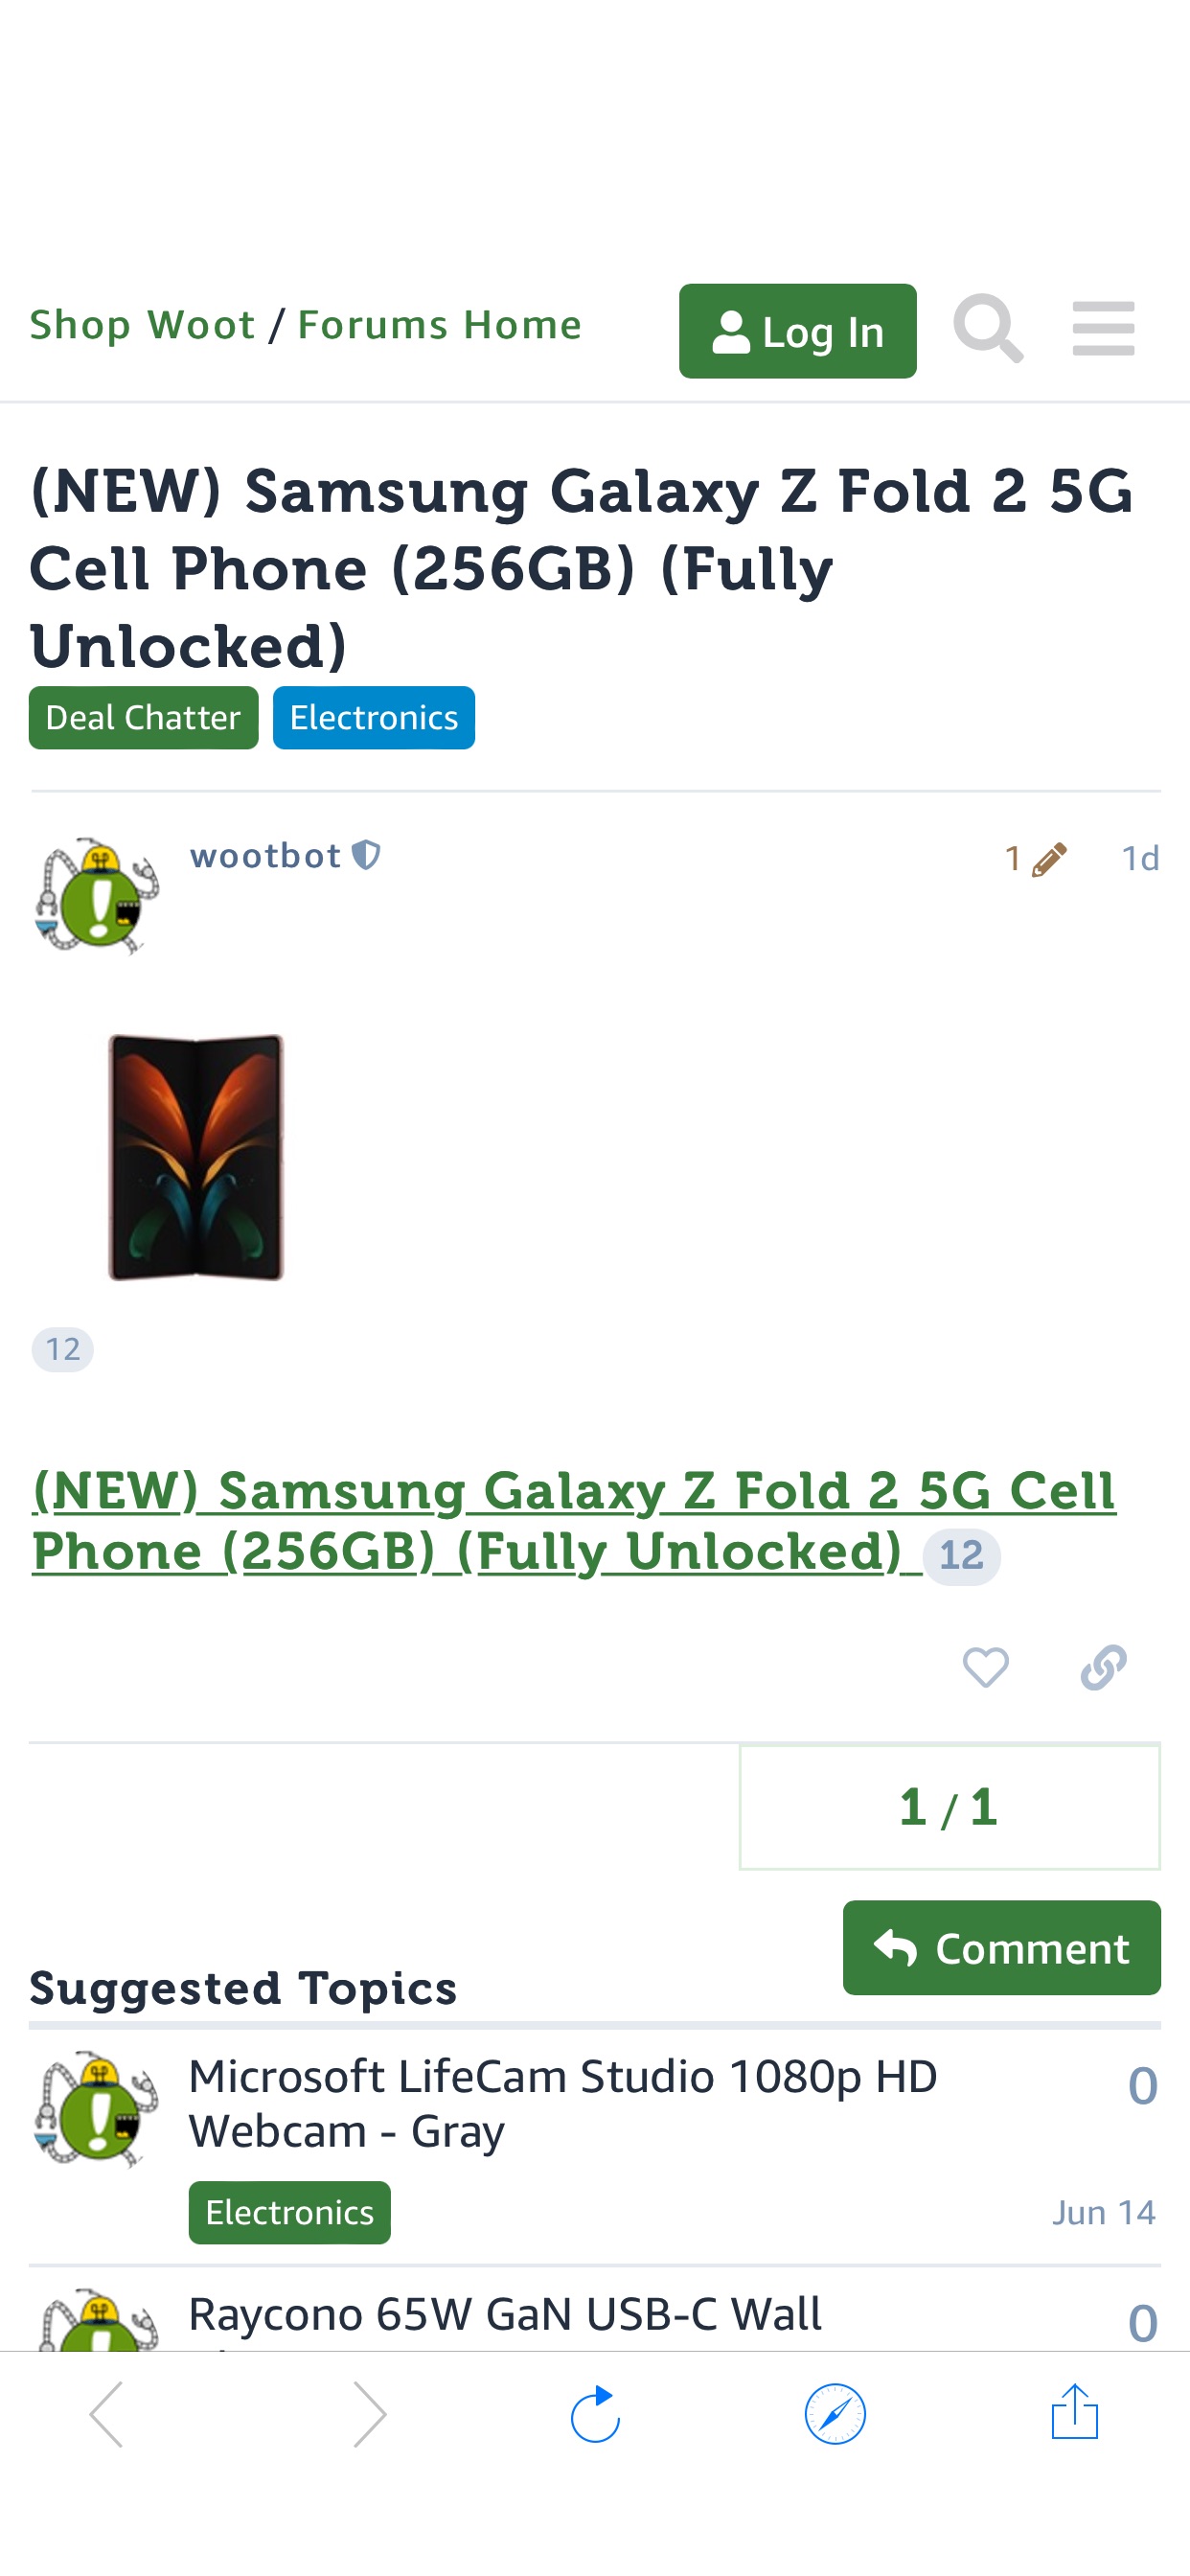 (NEW) Samsung Galaxy Z Fold 2 5G Cell Phone (256GB) (Fully Unlocked) - Deal Chatter / Electronics - Woot